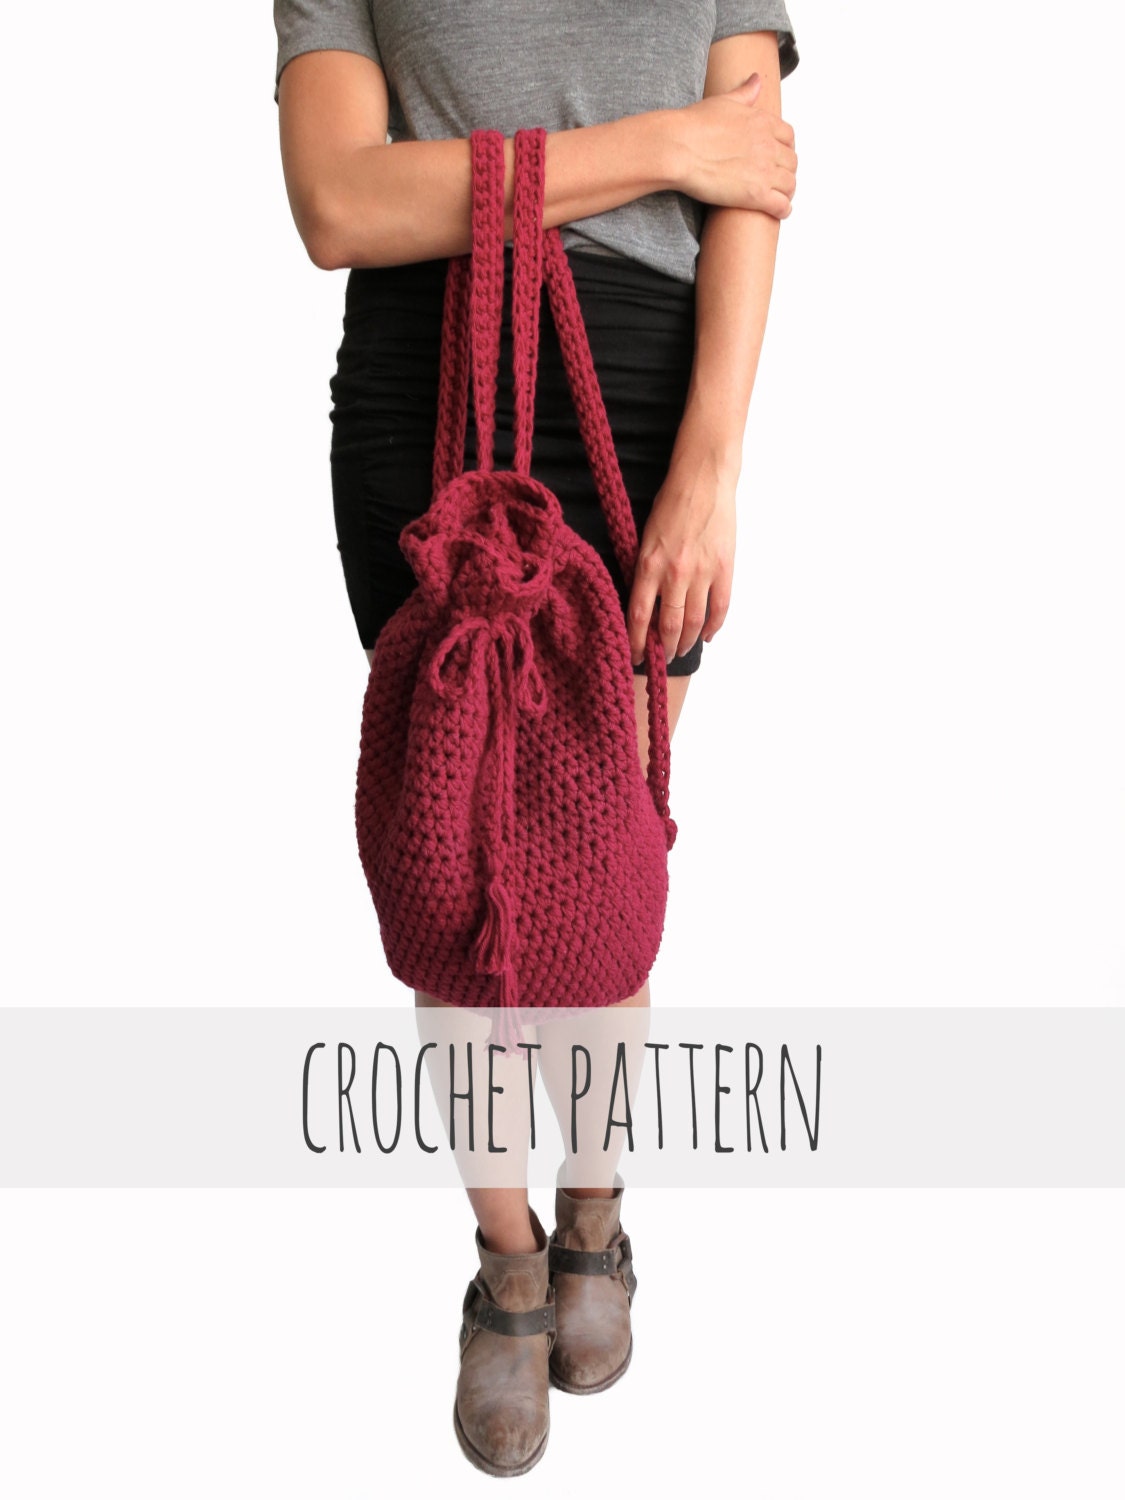 Crochet Backpack Free Patterns for Big Kids&Adults